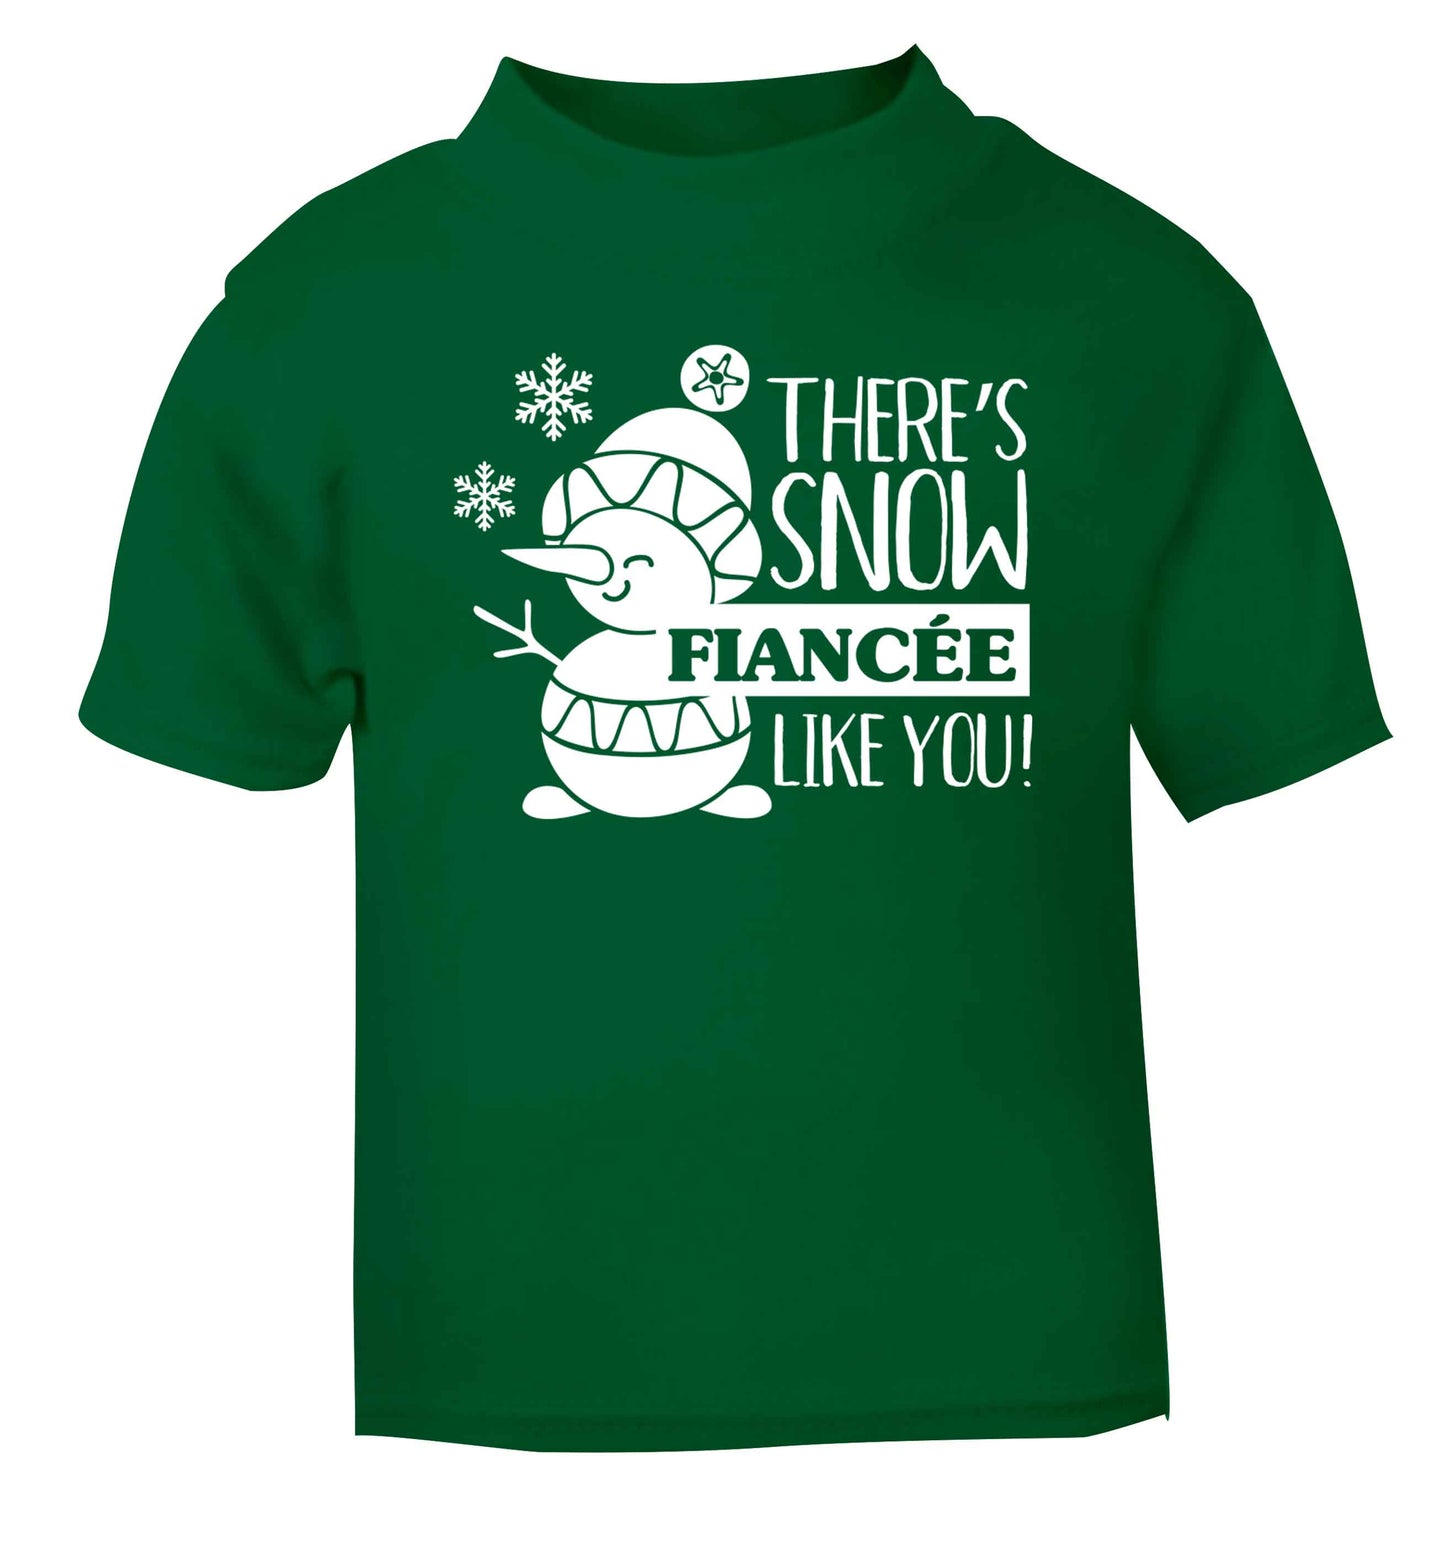 There's snow fiancee like you green baby toddler Tshirt 2 Years